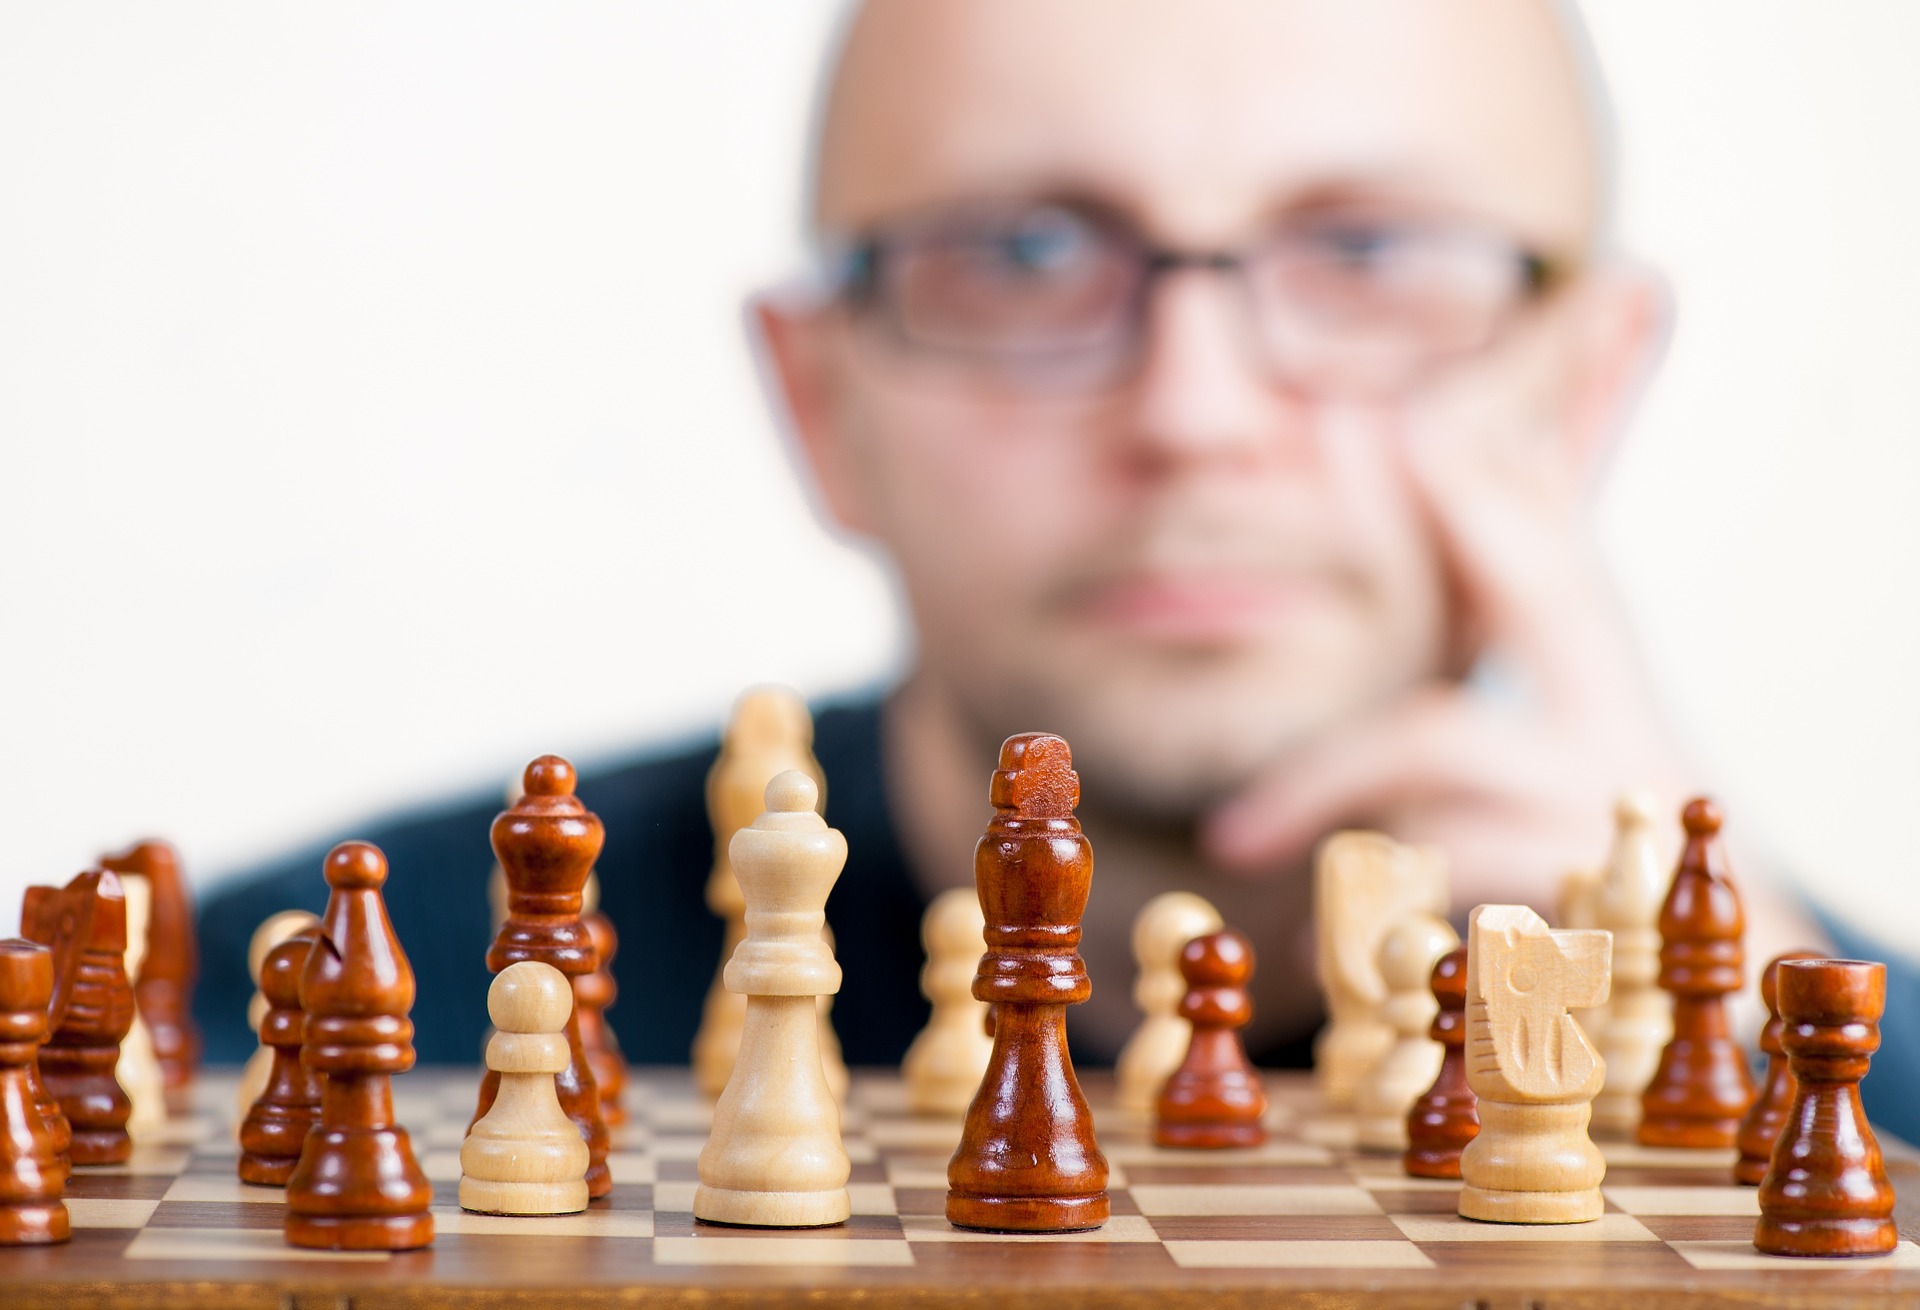 Pieces set up on a chess board, with a man appearing out of focus in the background with a thoughtful expression on his face